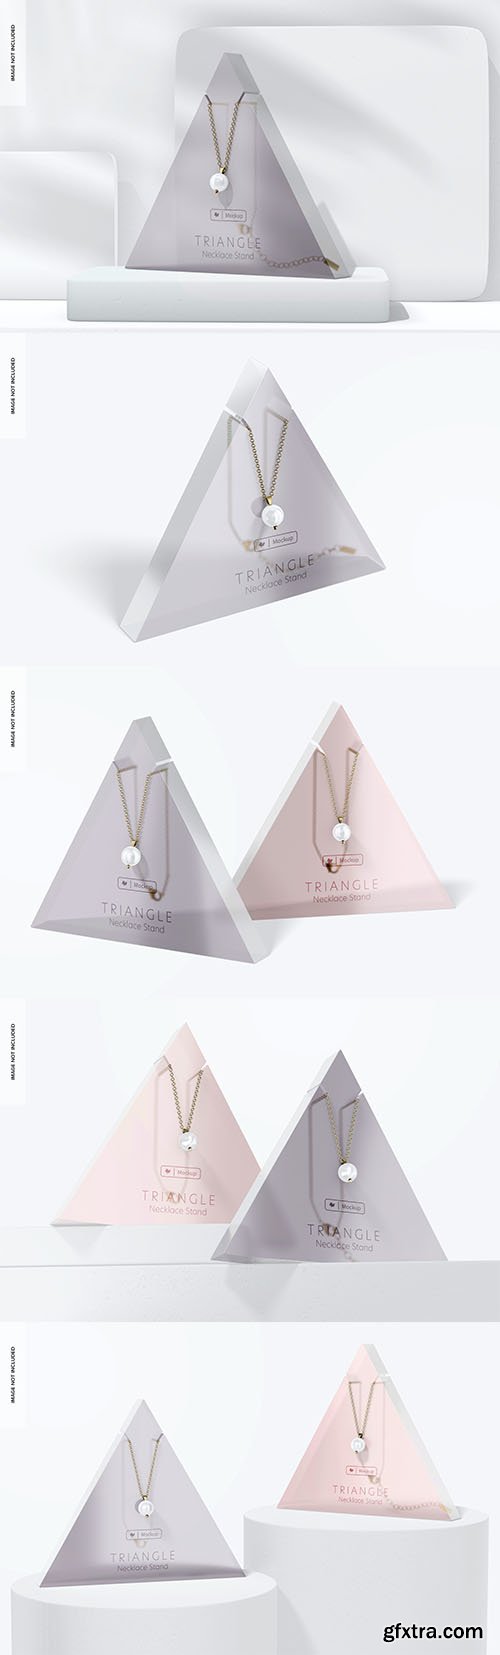 Triangle necklace display stand mockup